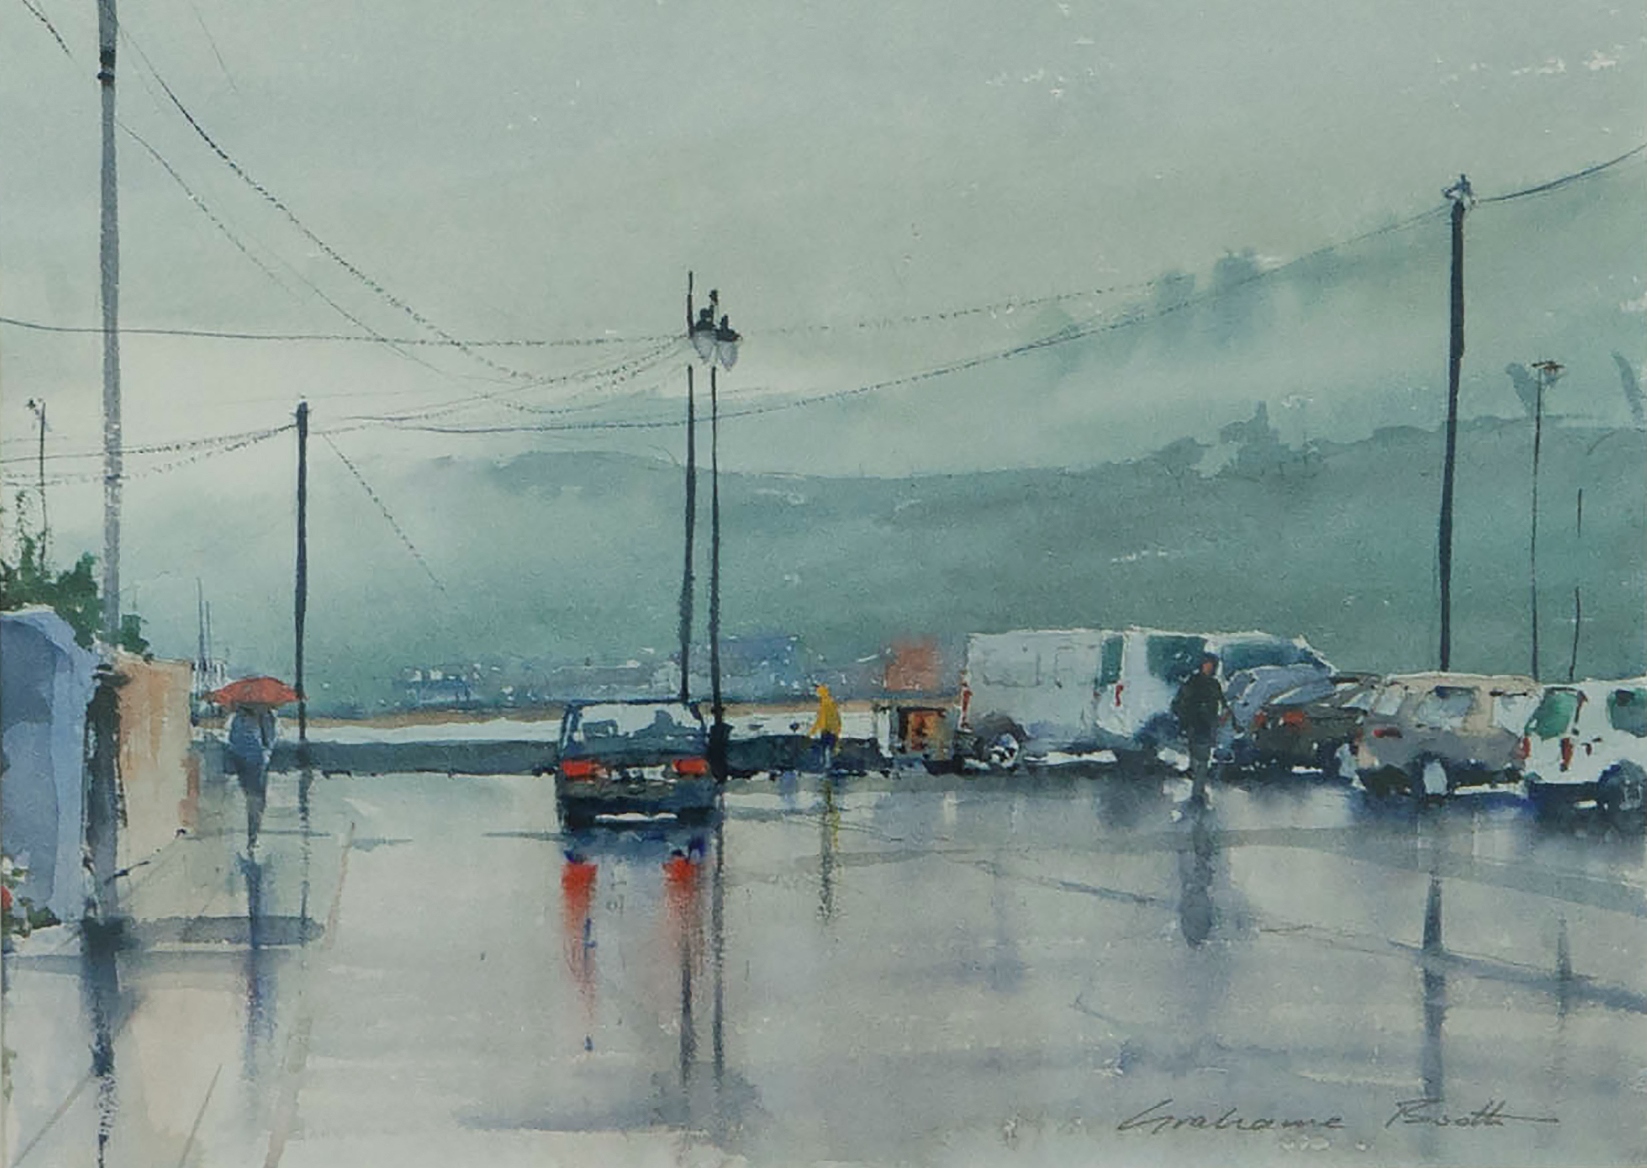 Rainy Day, Ballyhack by Grahame Booth